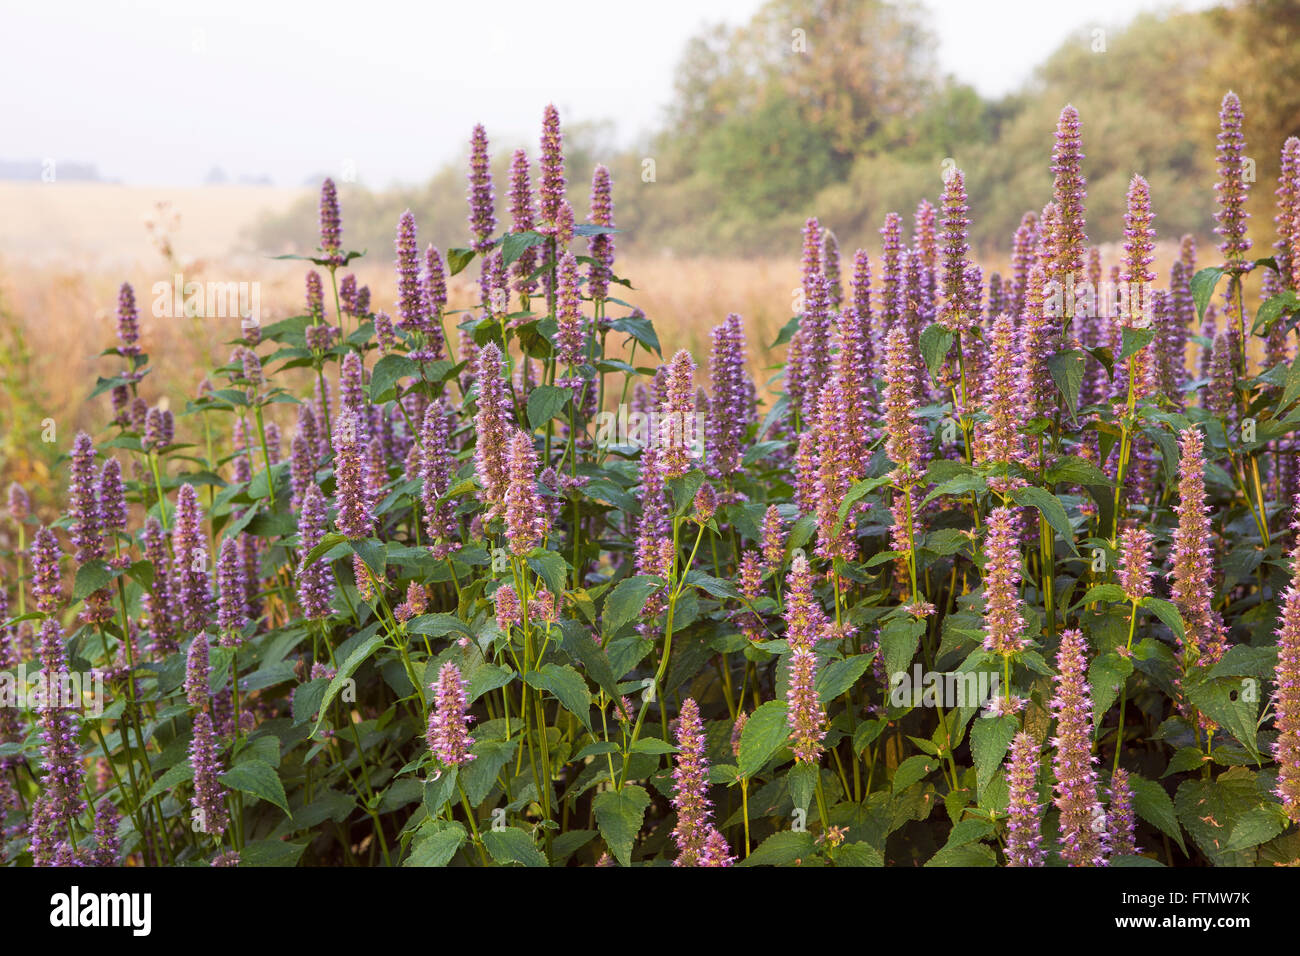 Image of giant Anise hyssop (Agastache foeniculum) in a summer garden. Stock Photo